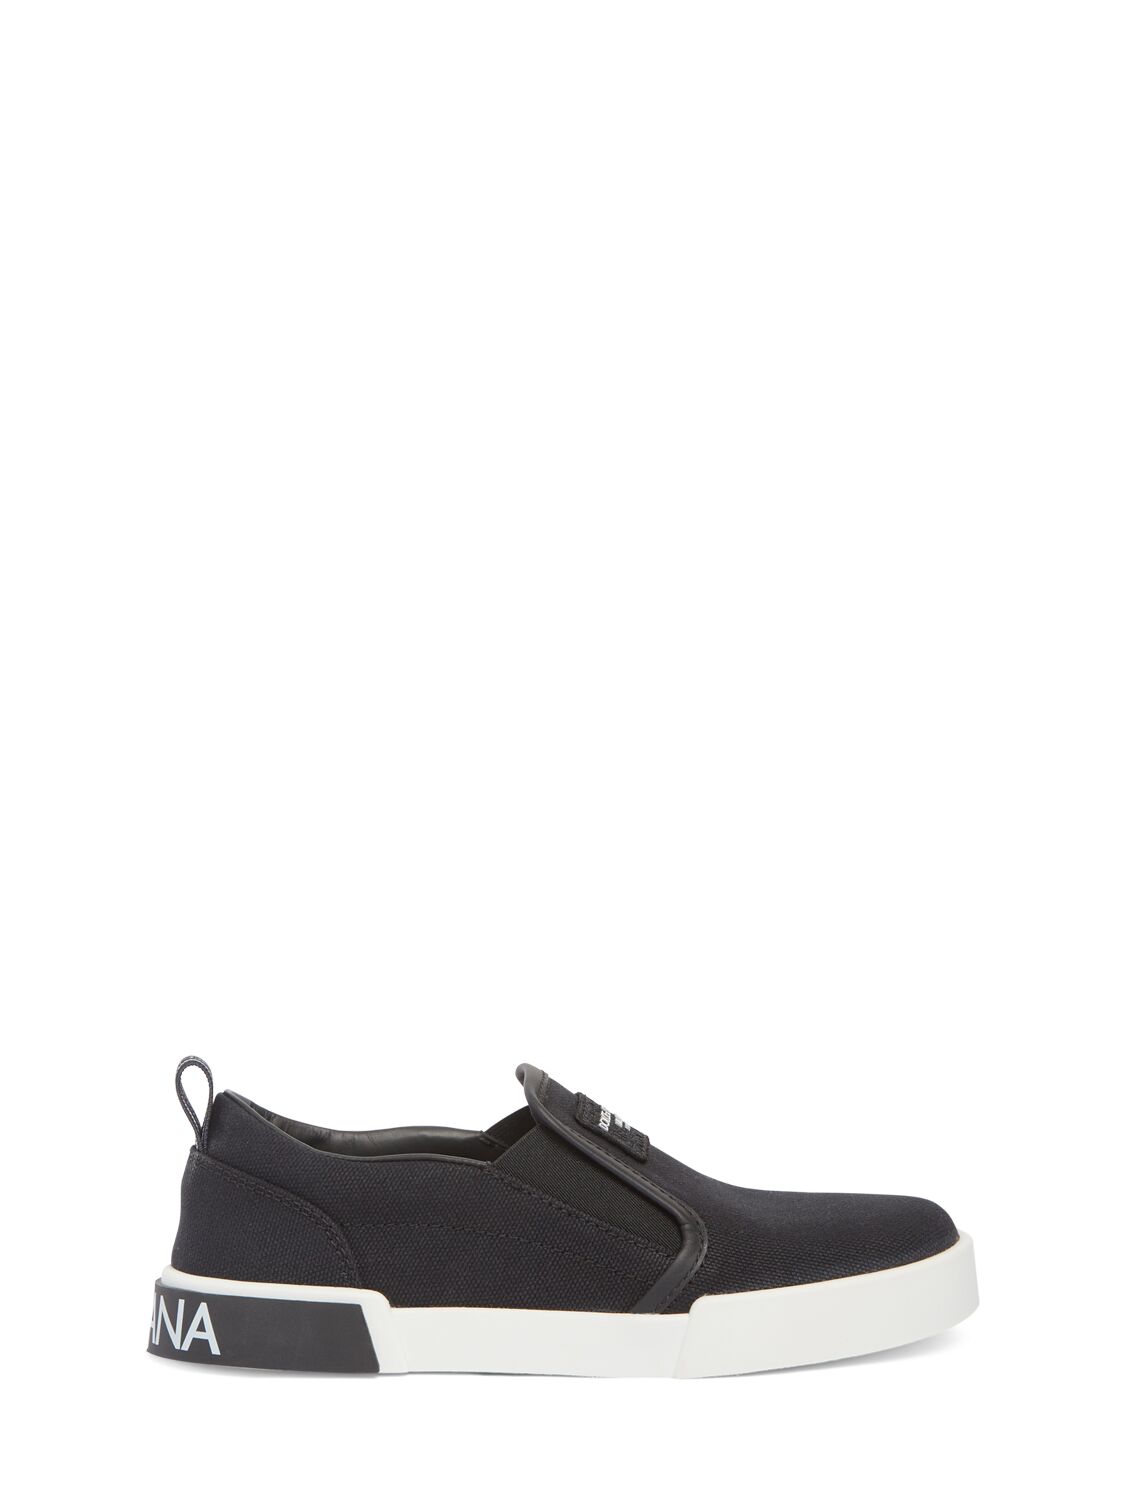 Canvas & Leather Slip-on Sneakers